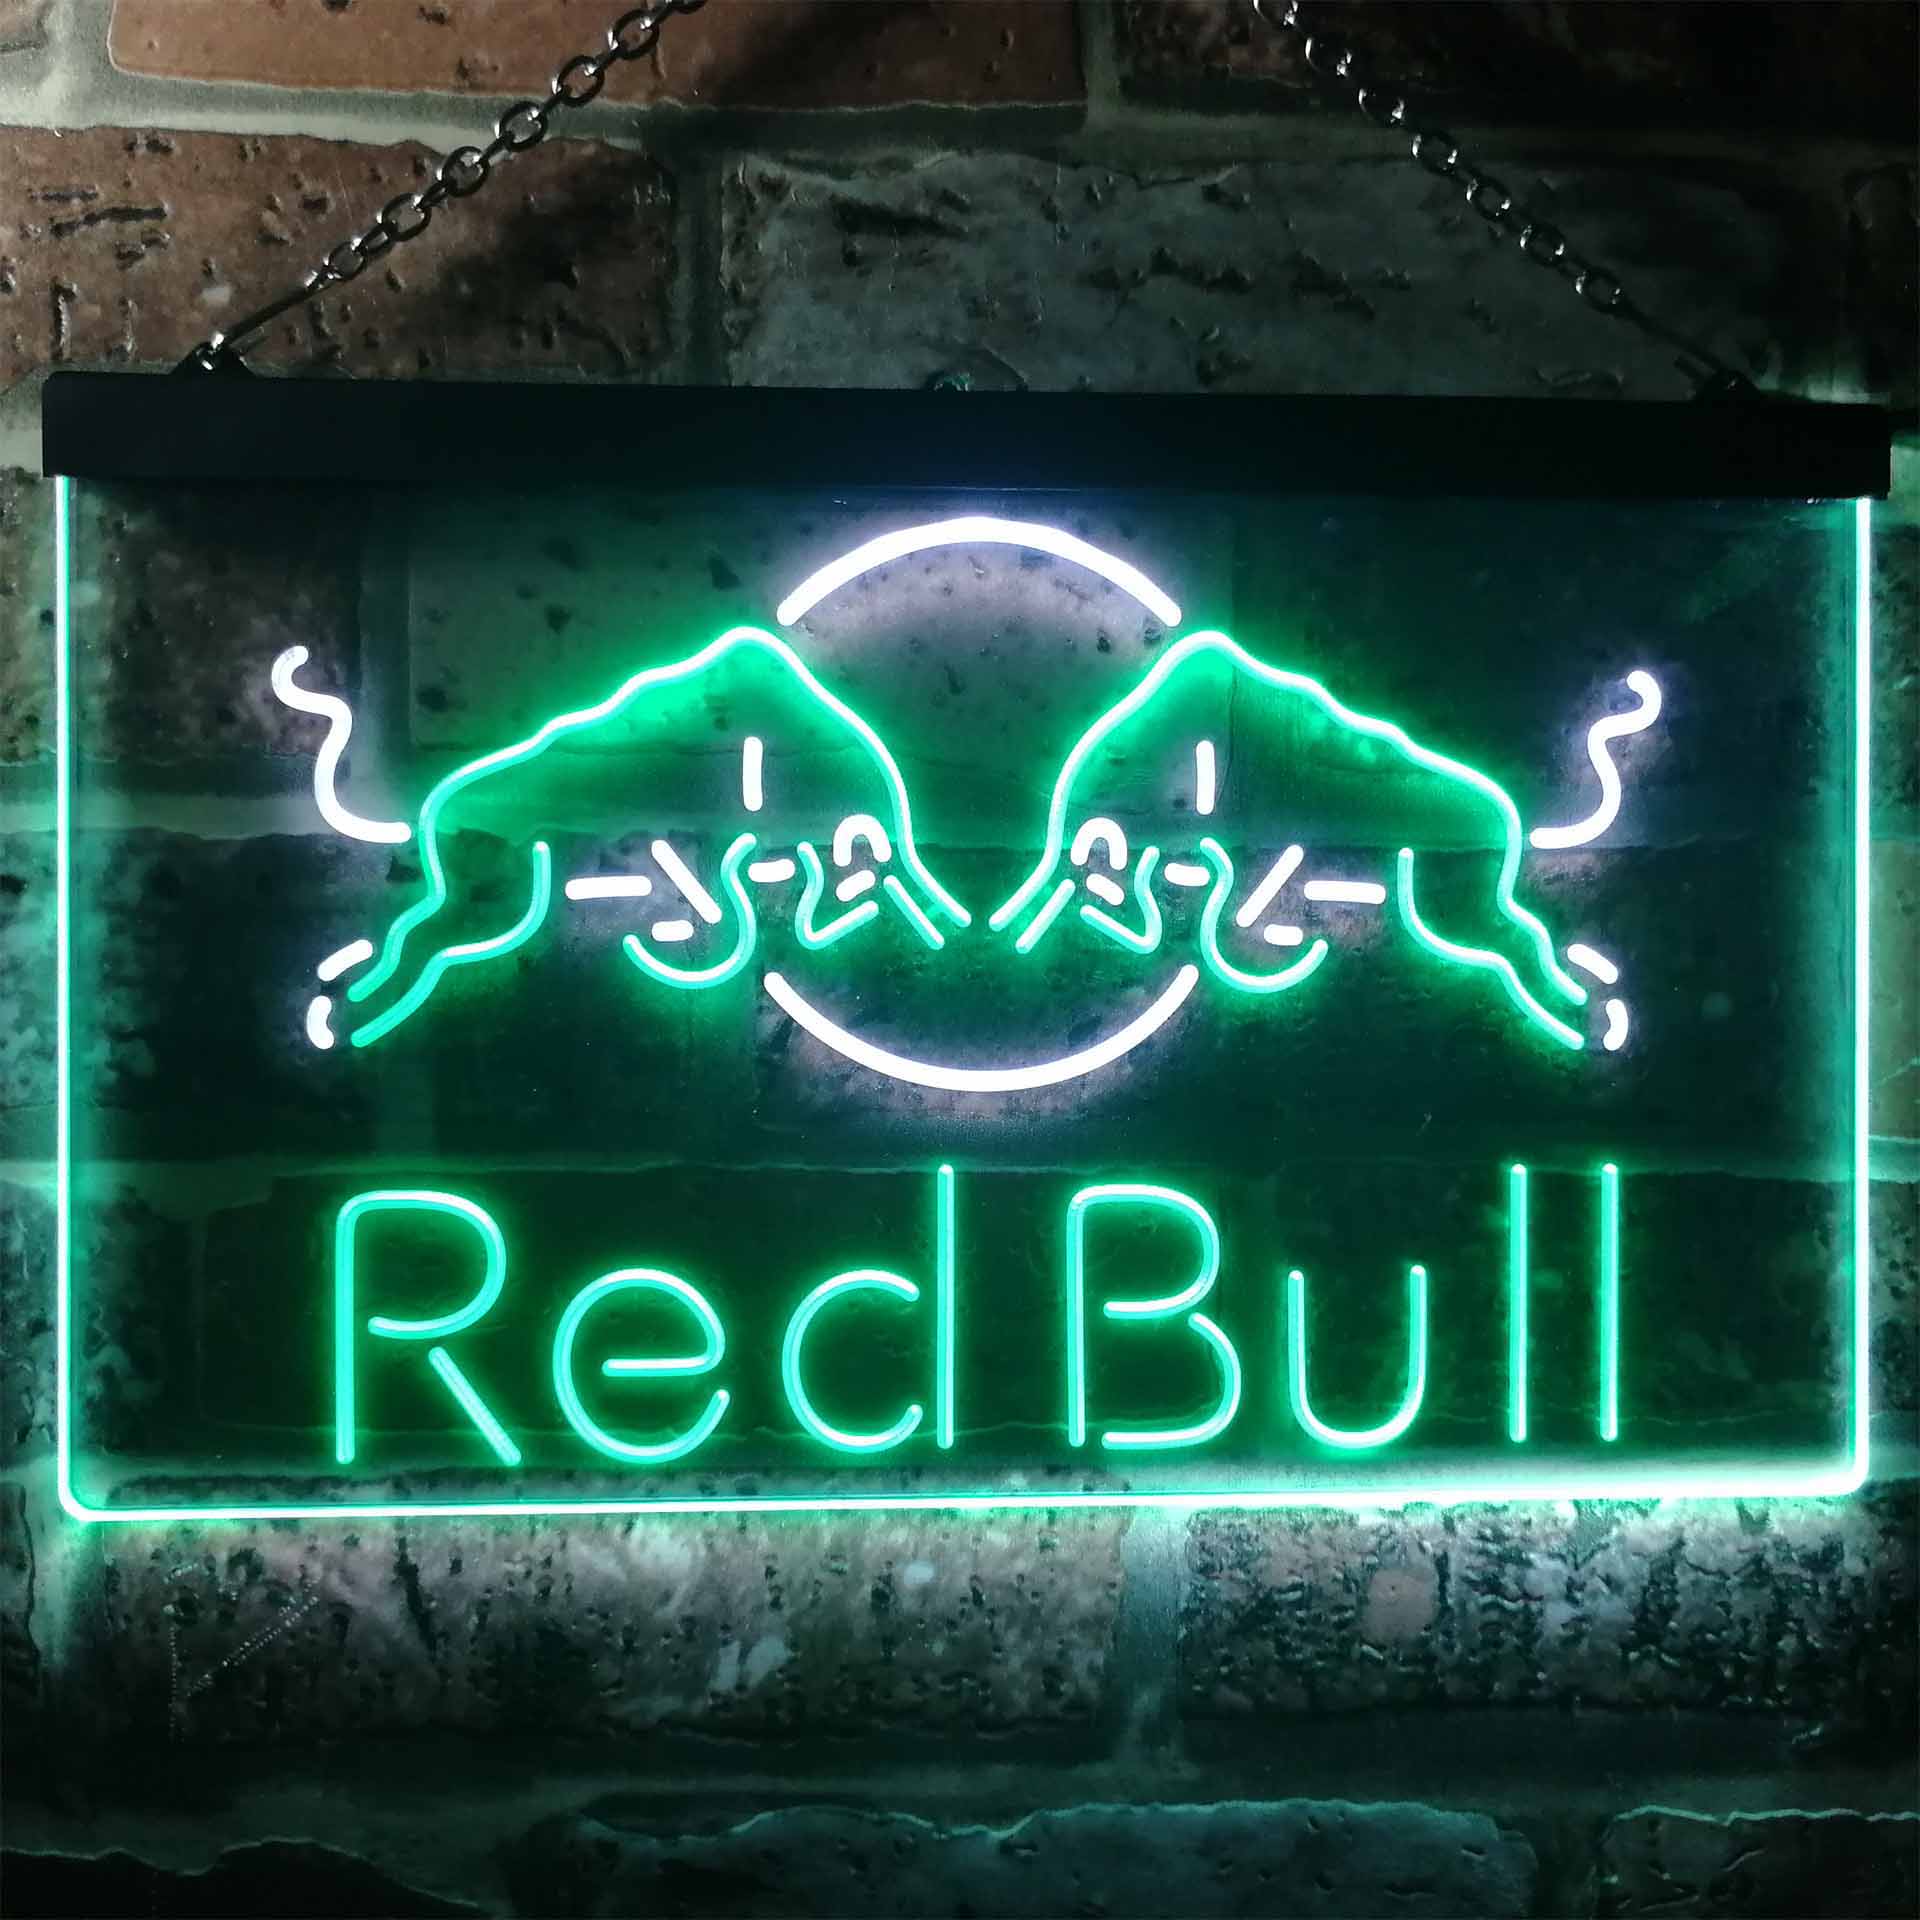 Red Bull Sport Neon Sign - LED LAB CAVE